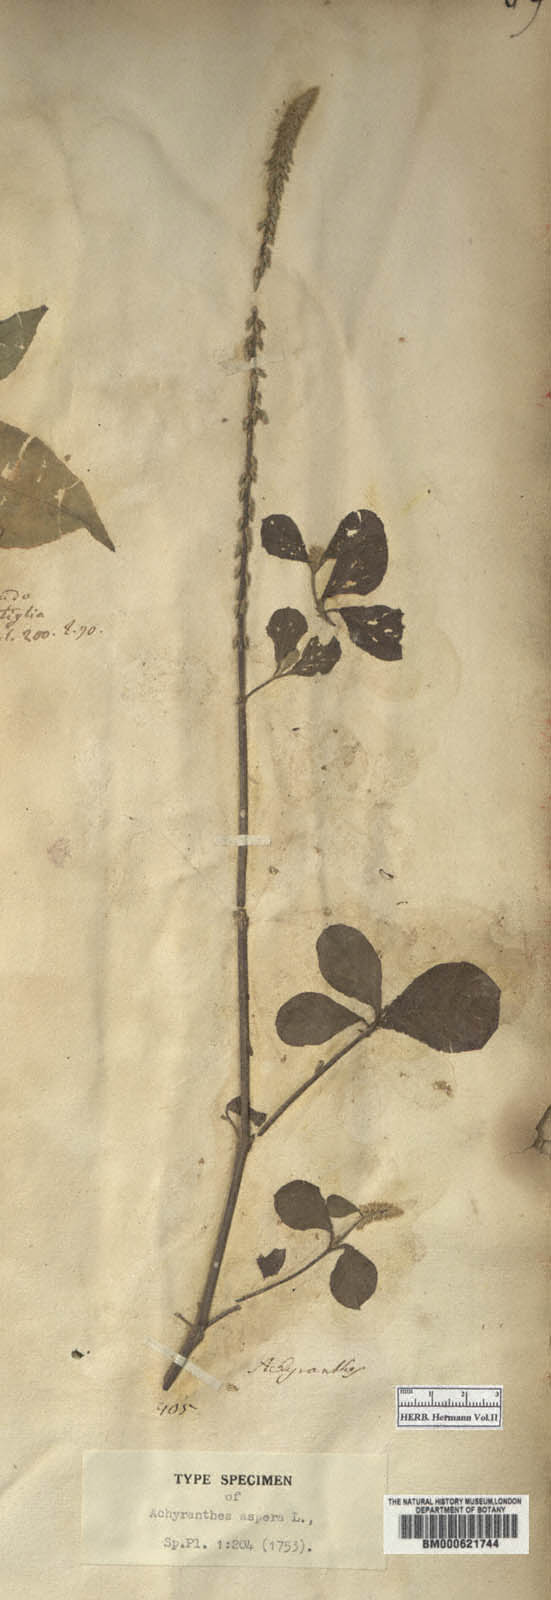 http://www.nhm.ac.uk//resources/research-curation/projects/hermann-herbarium/lgimages/BM000621744.JPG